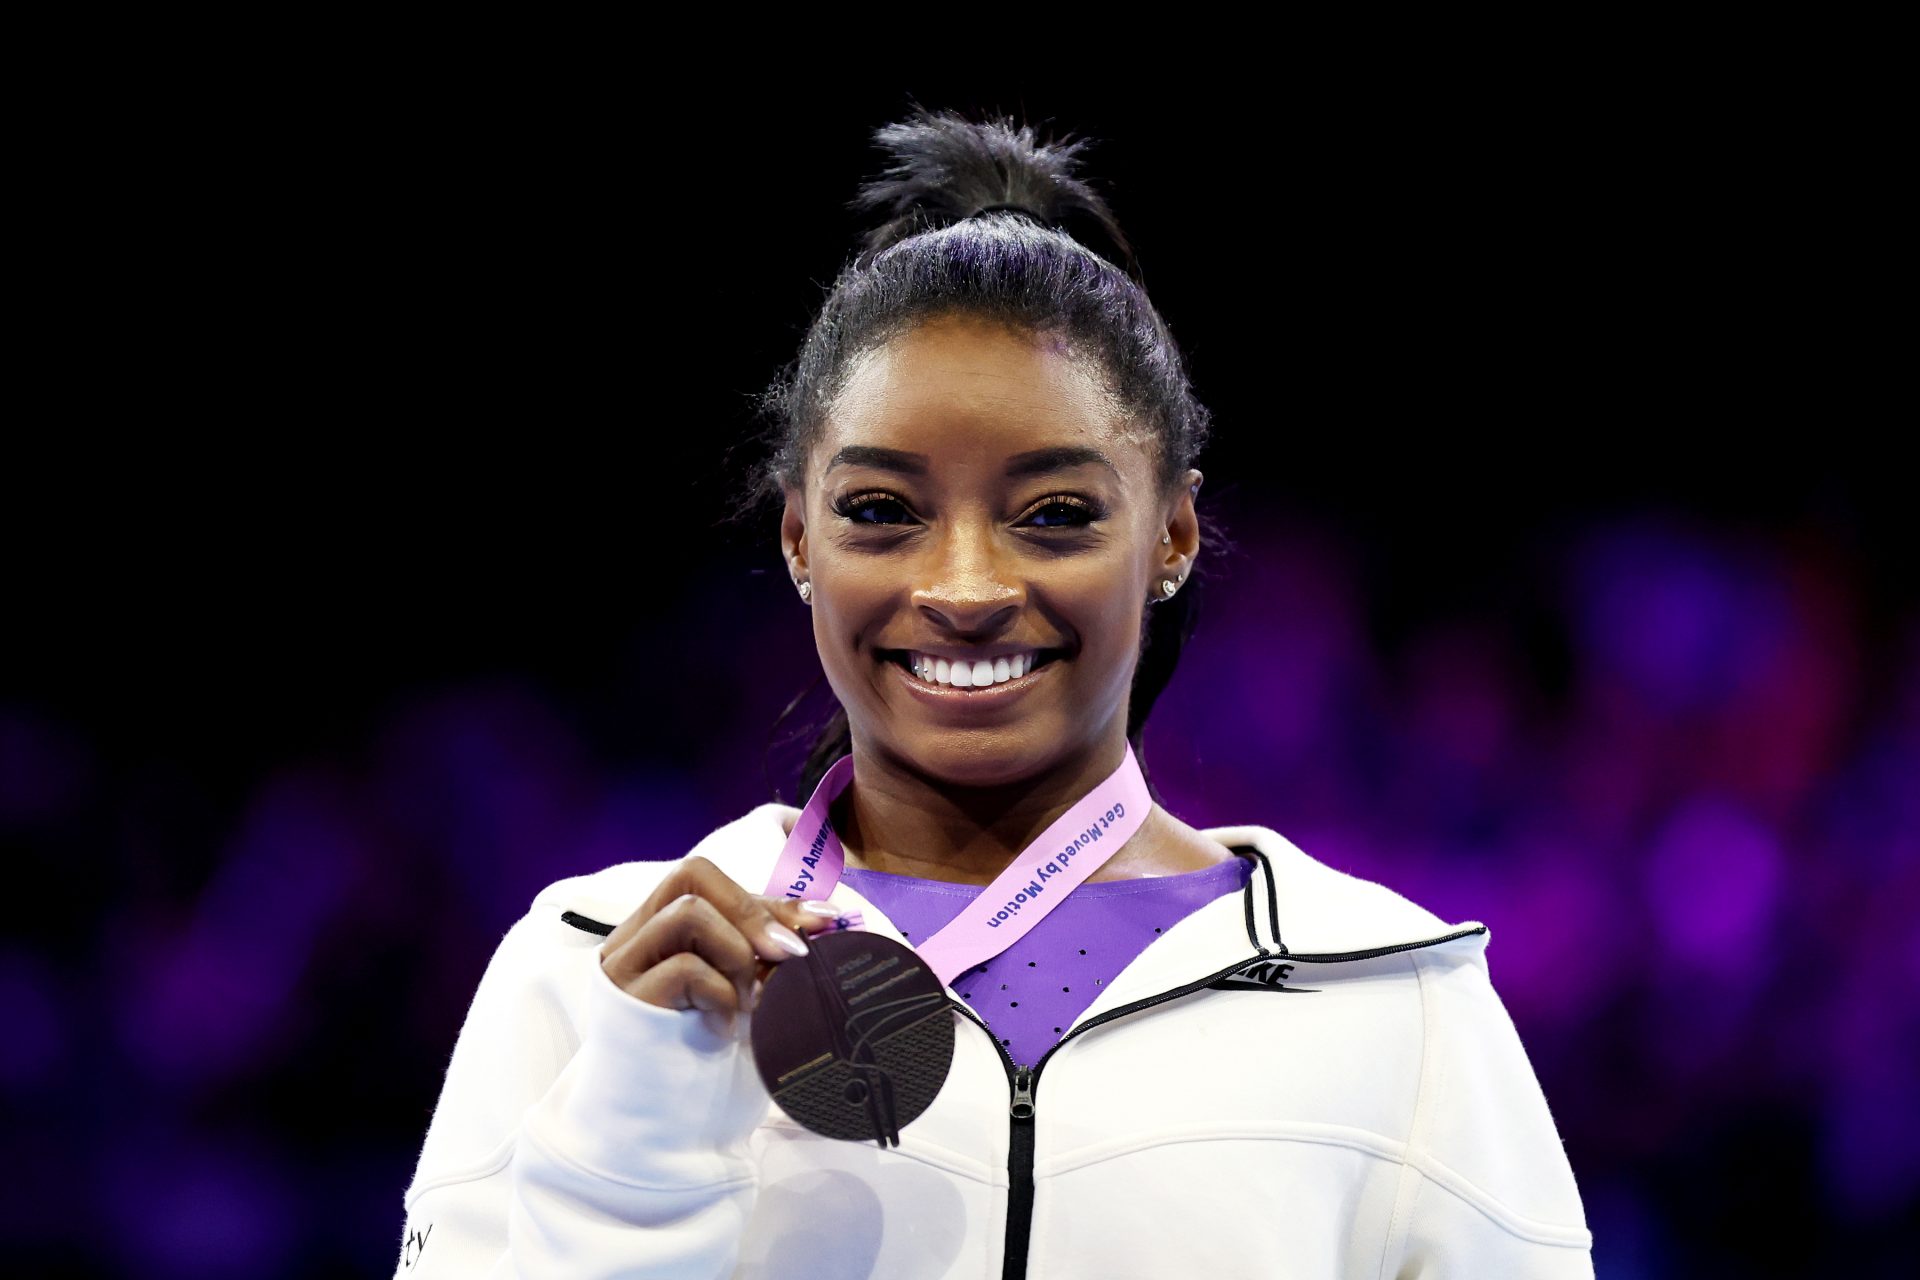 Is Simone Biles the greatest athlete of all time?